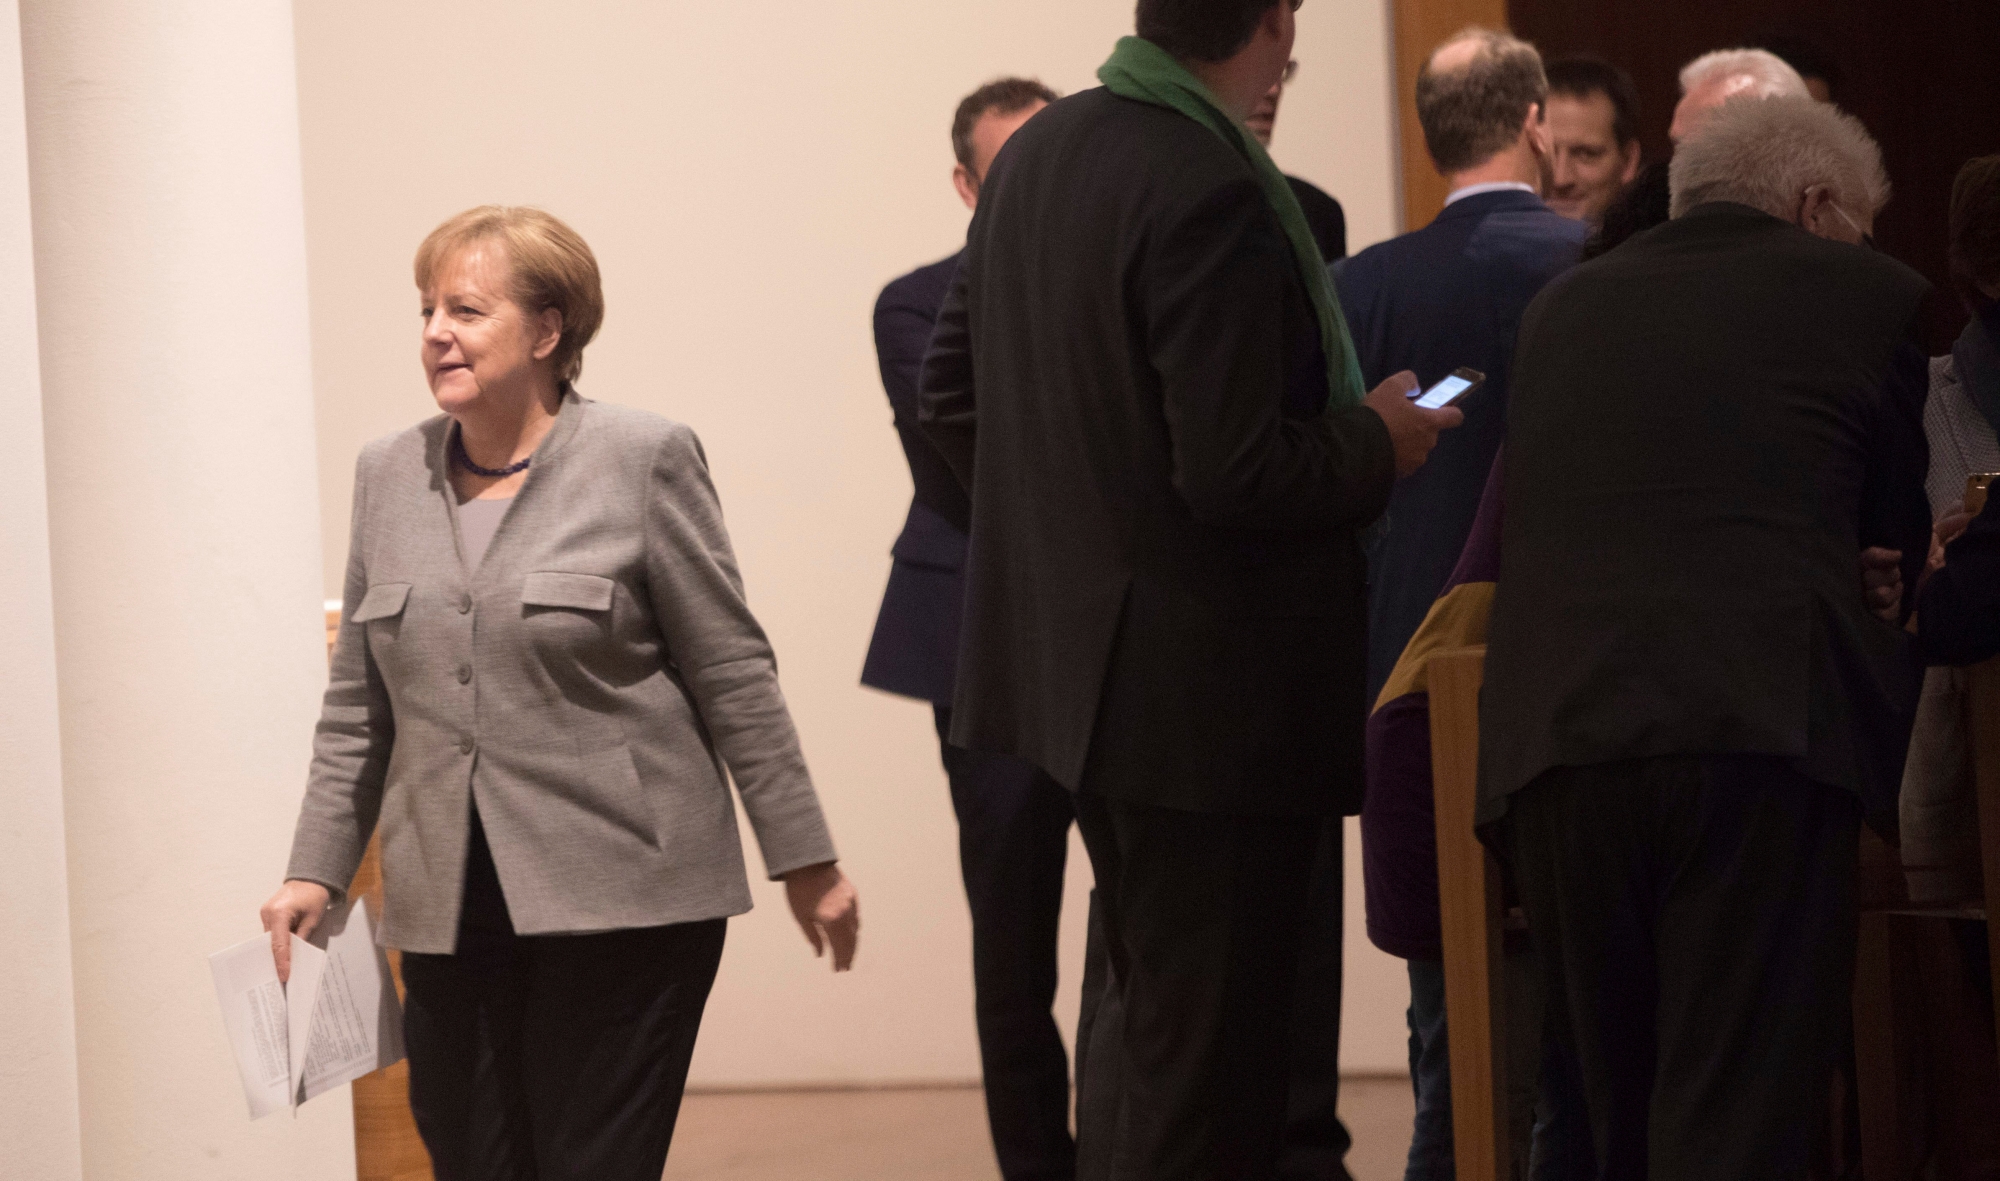 German chancellor Angela Merkel is on her way to another round of exploratory talks of her Christian parties' bloc , the Free Democrats and the Green Party, in Berlin, Sunday, Nov. 19, 2017. They are seeking compromises on the thorny issues of migration and climate change so they can proceed with formal talks on forming a new coalition government. ( Joerg Carstensen/dpa via AP) Germany Politics